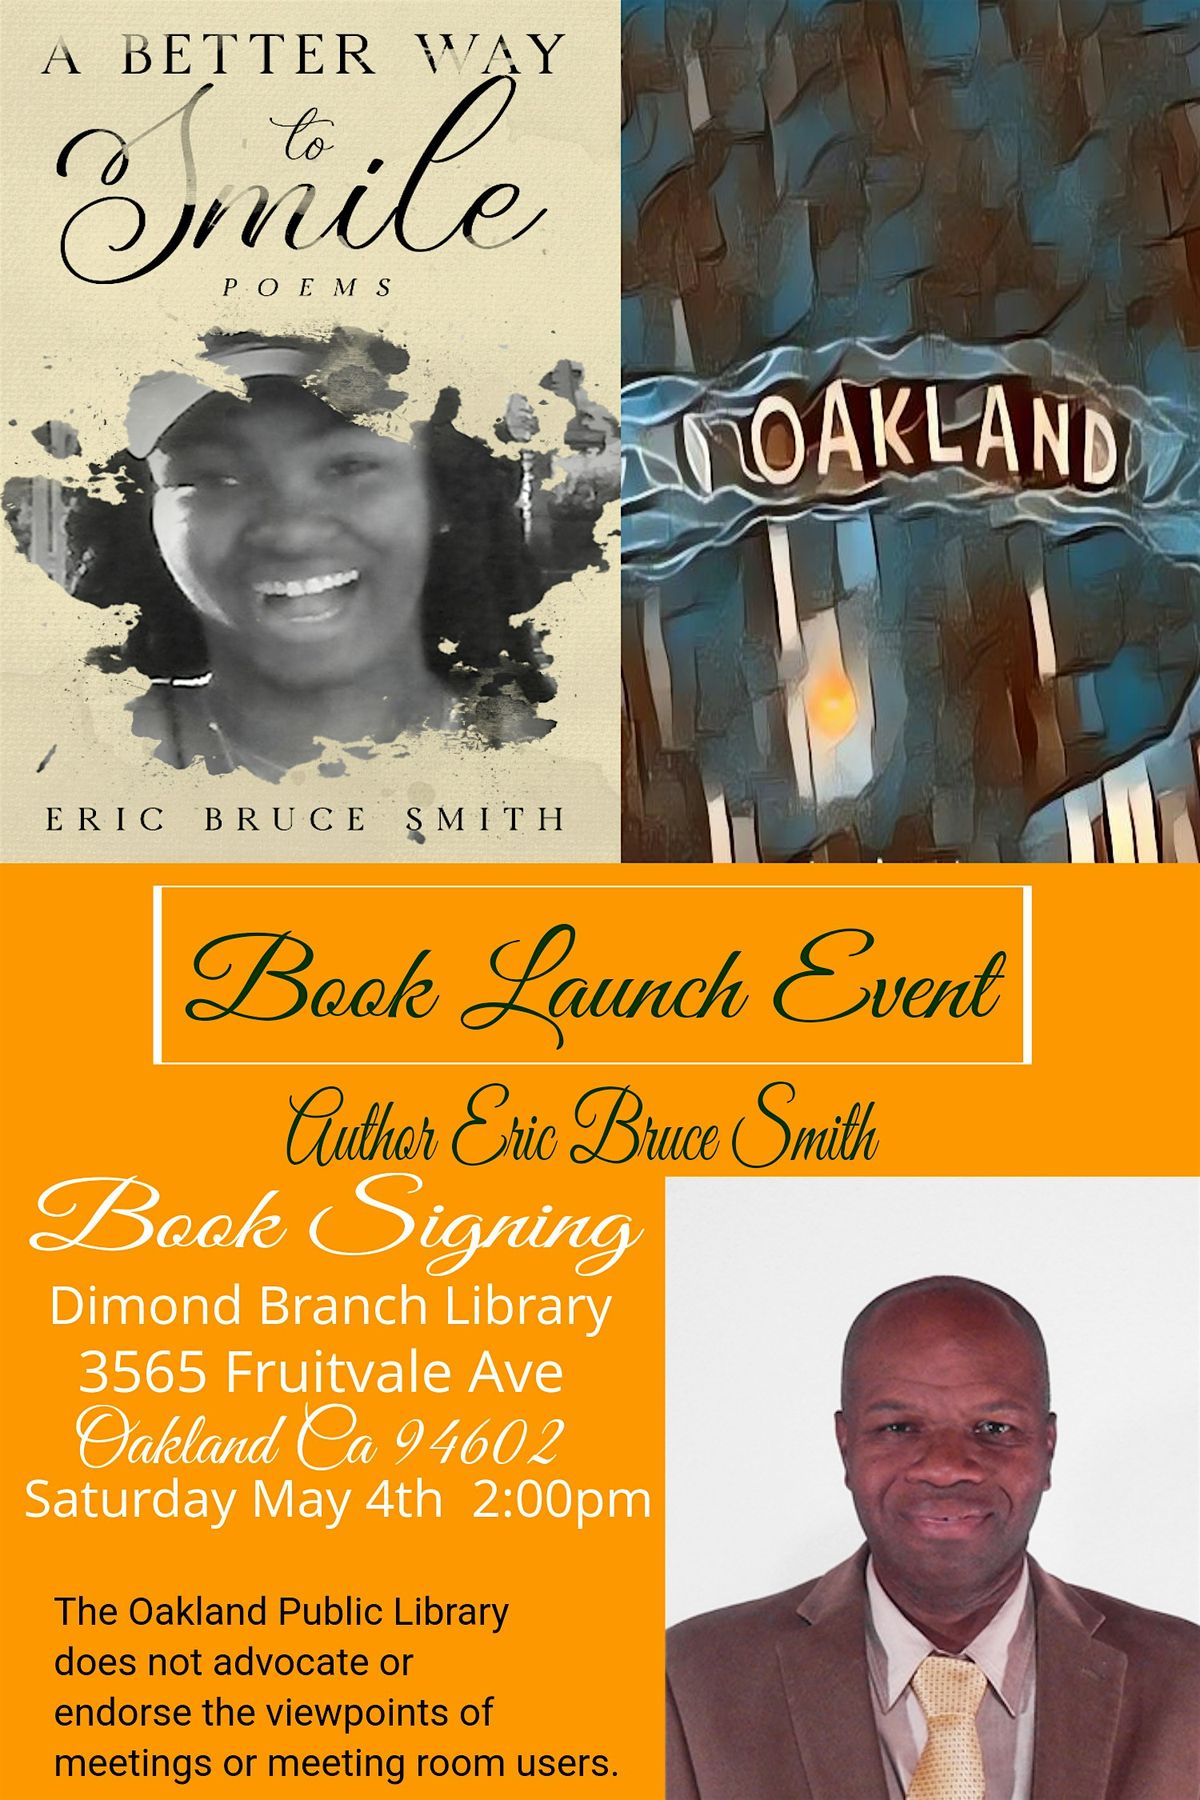 Book Launch with Author Eric Bruce Smith    " A Better Way to Smile Poems"